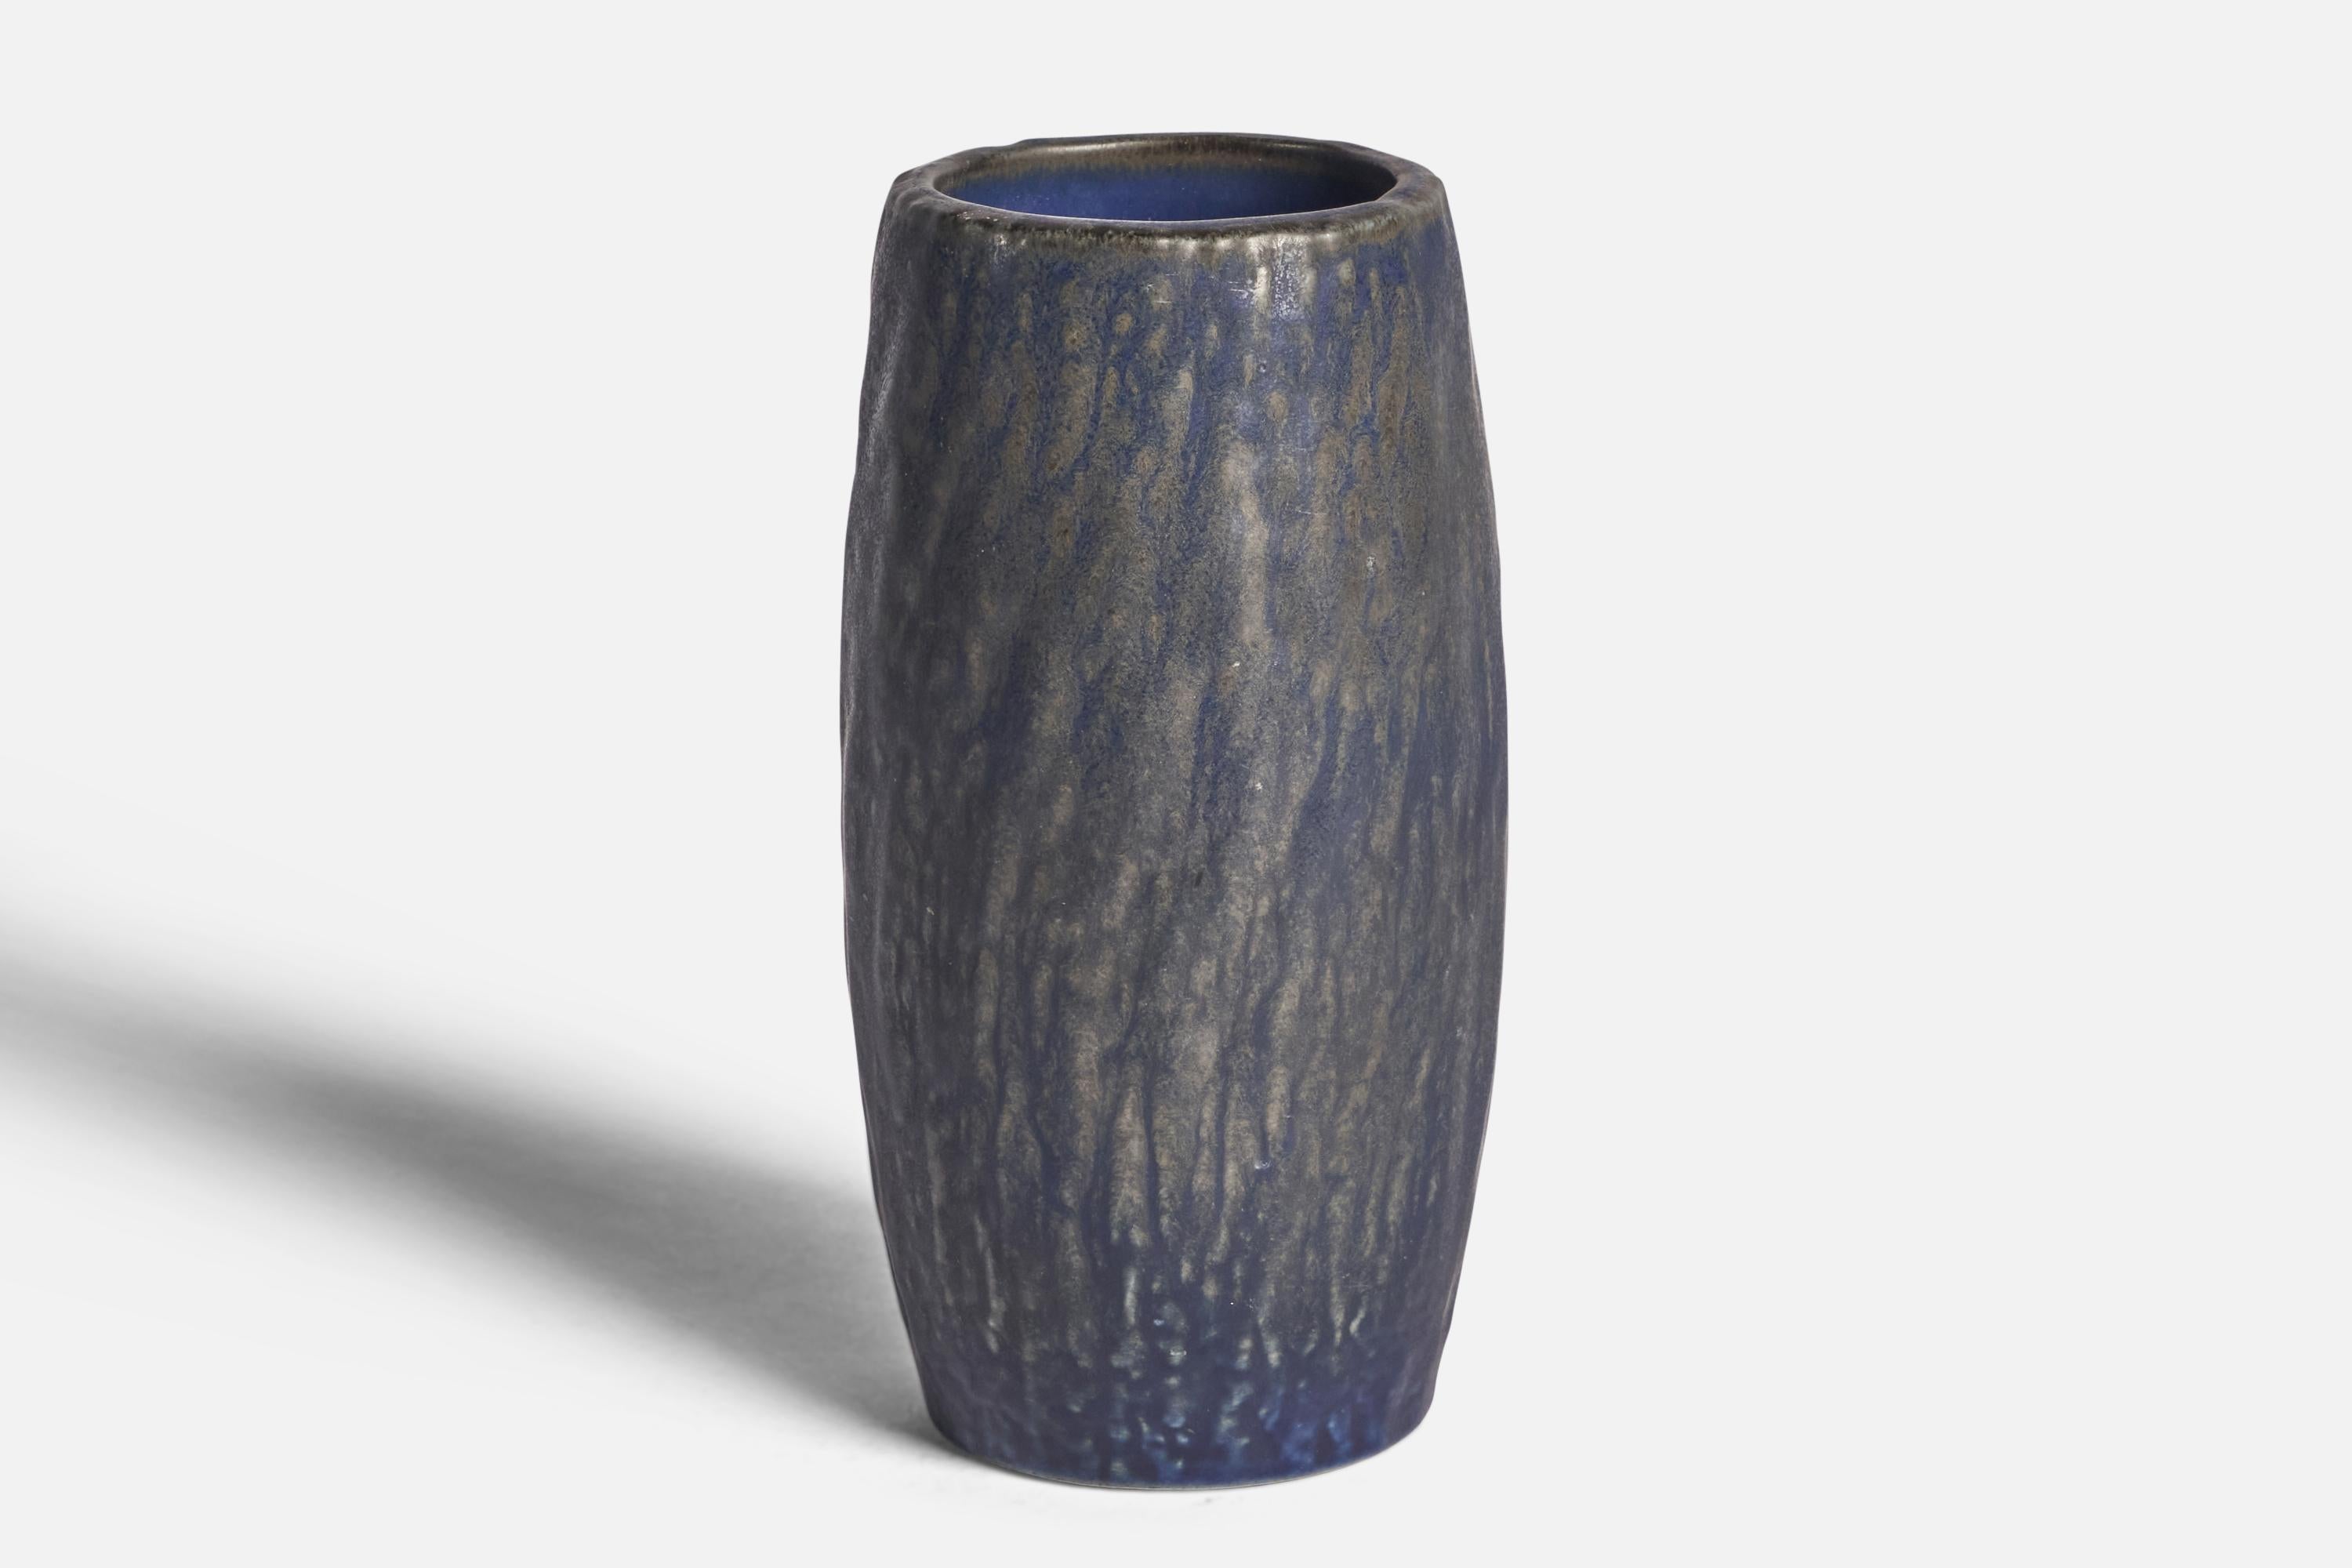 A blue-glazed stoneware vase designed by Gunnar Nylund and produced by Rörstrand, Sweden, 1940s.